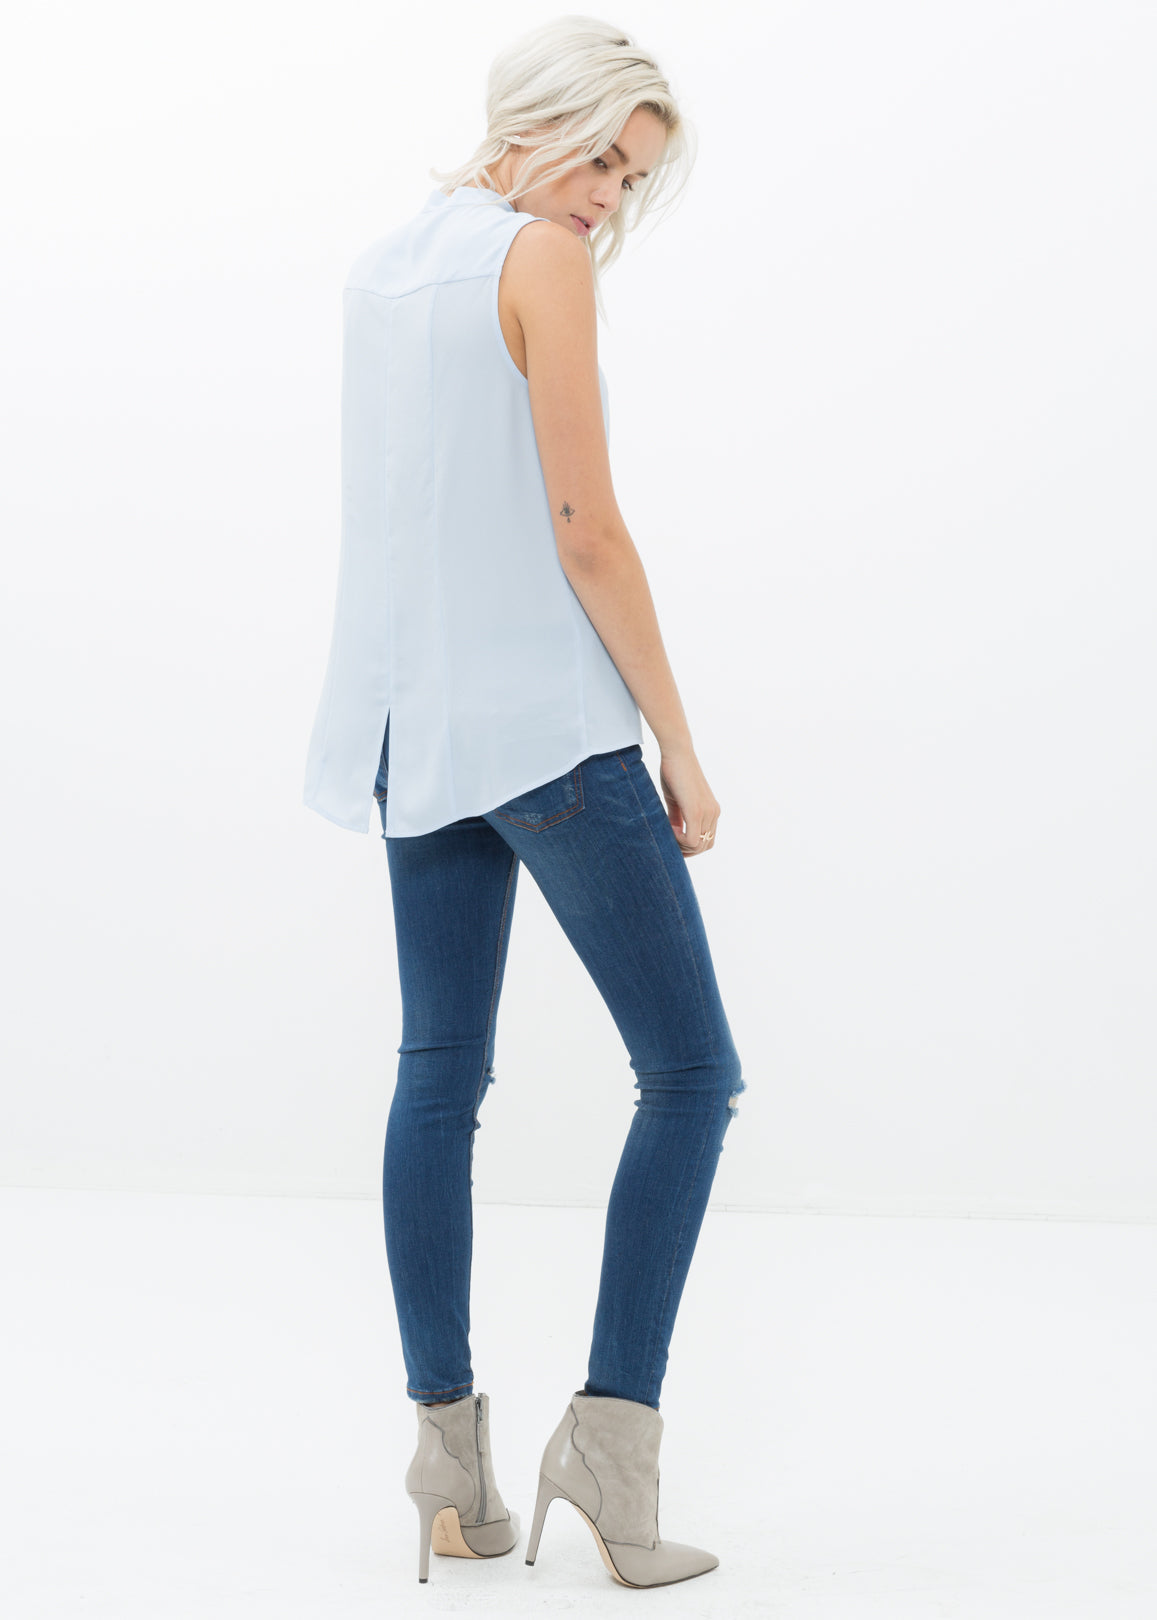 Women's Stand Collar Sleeveless Blouse In Cloud Blue